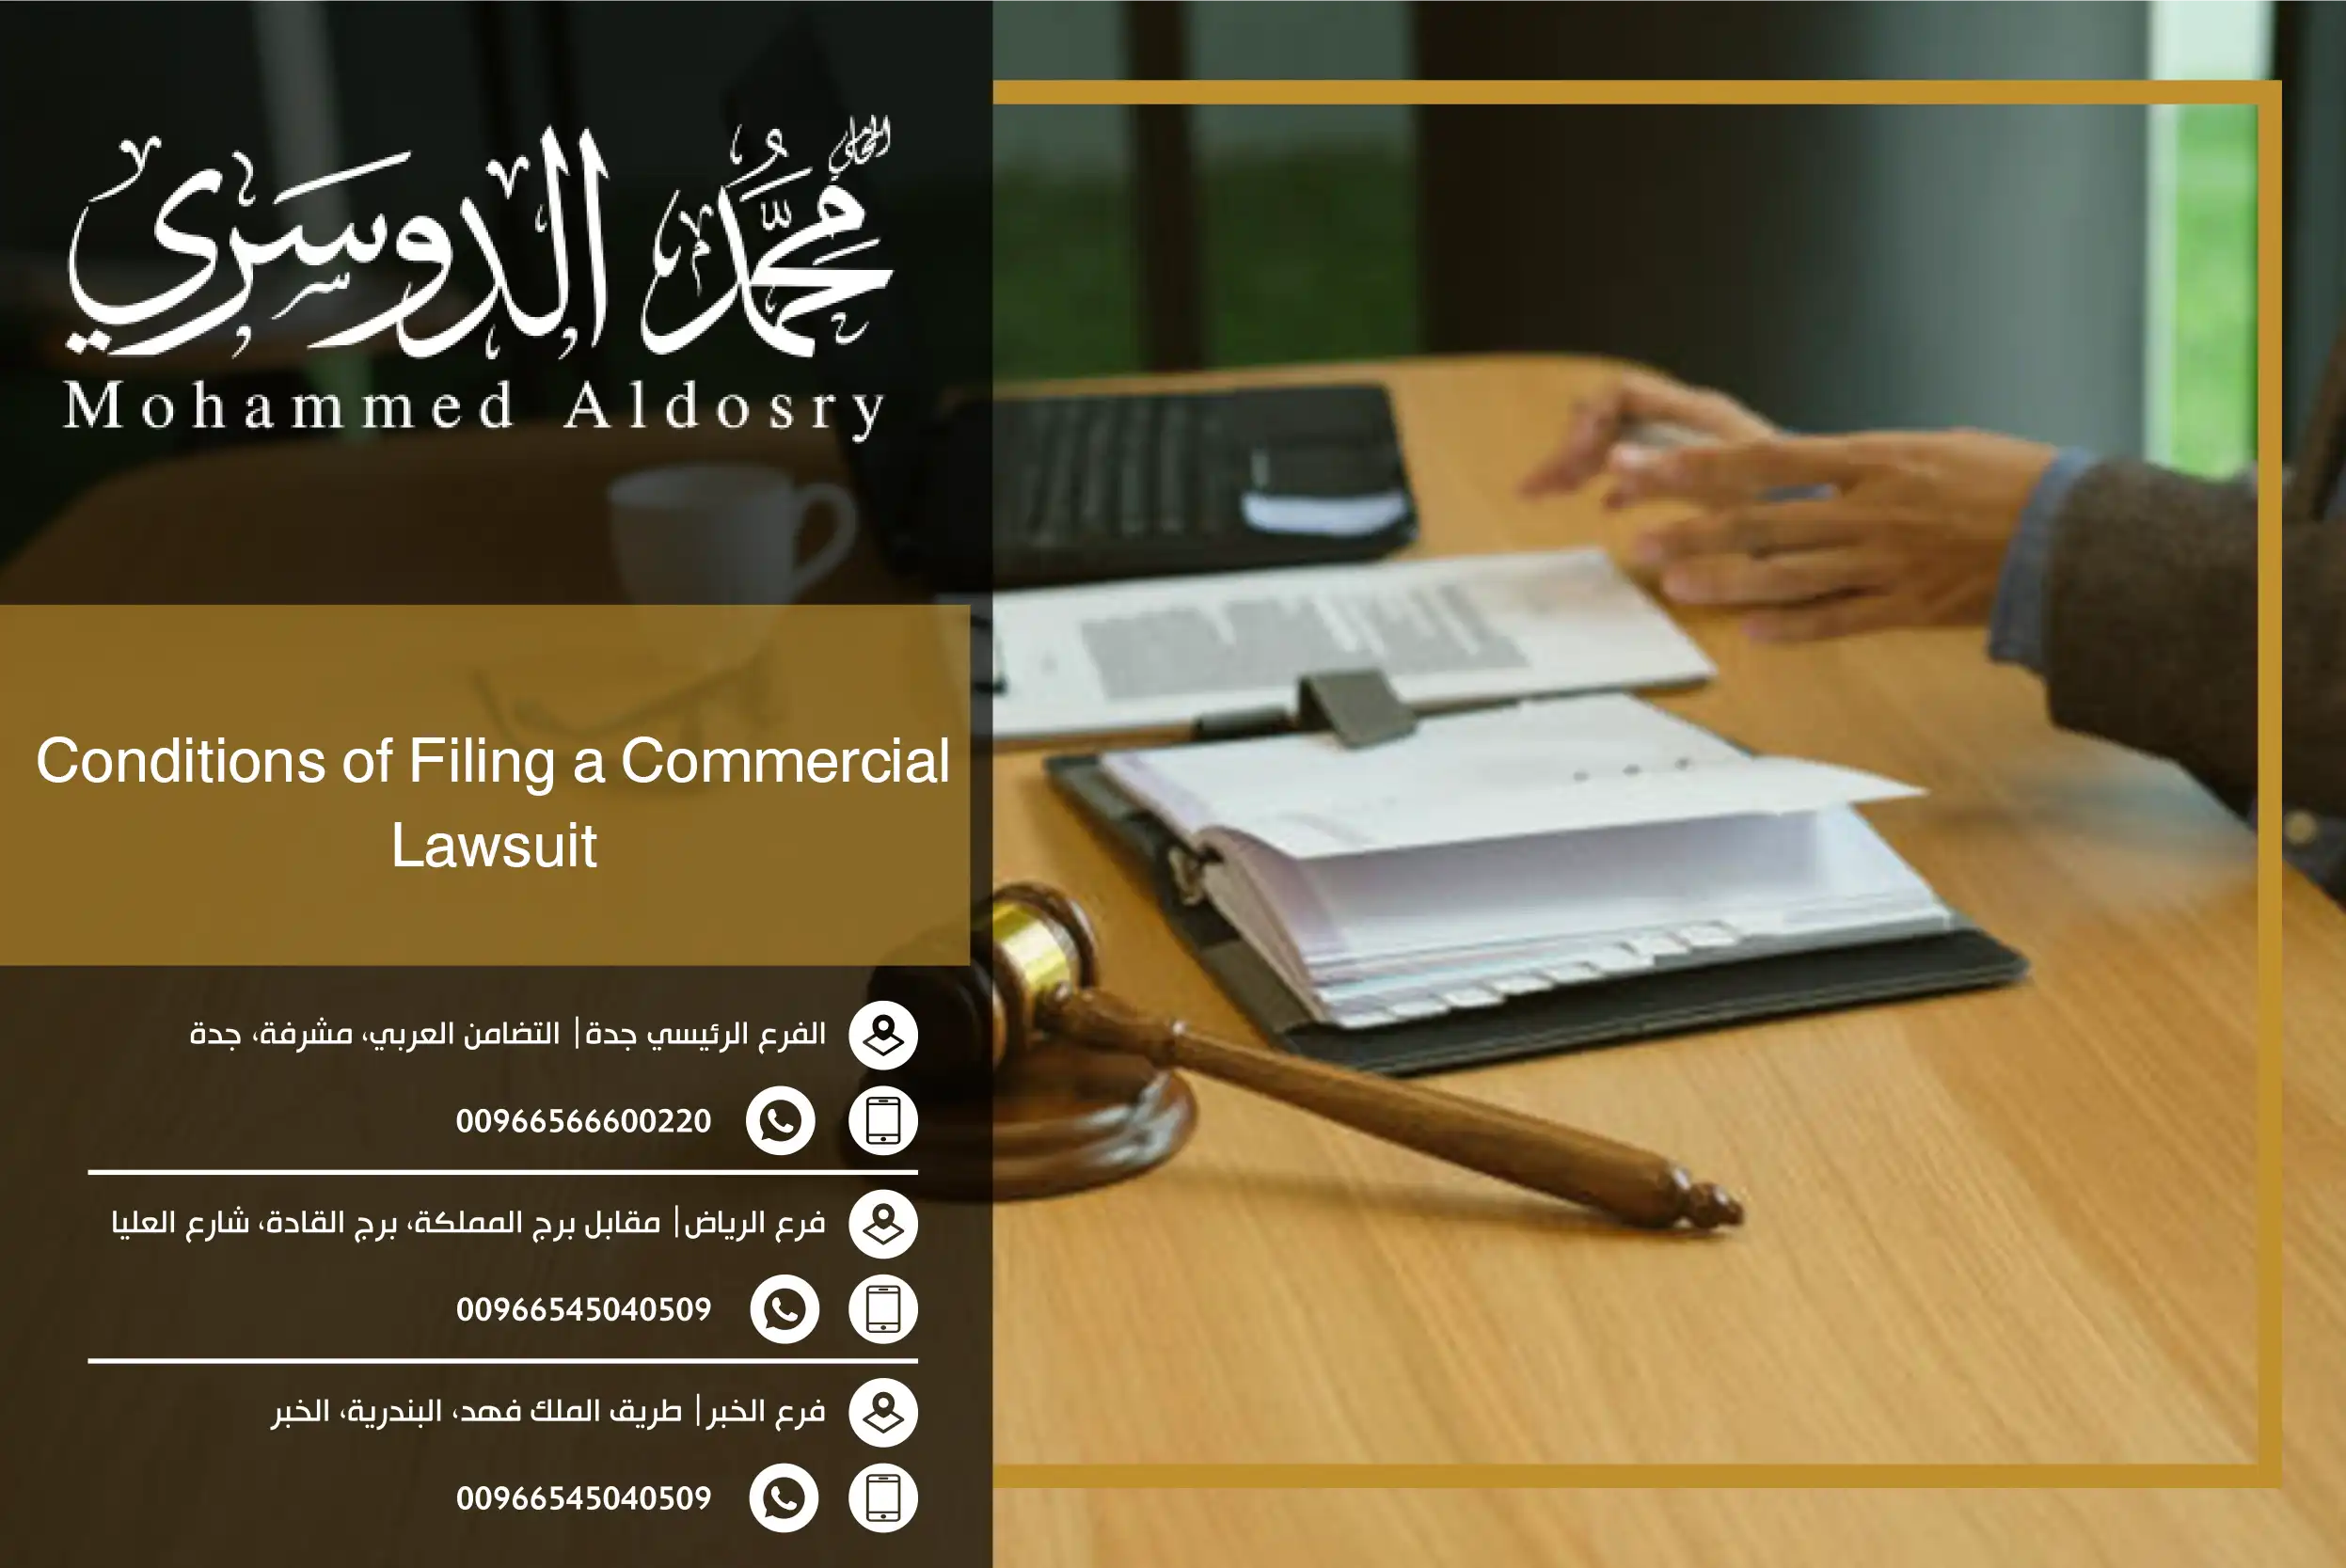 Conditions of Filing a Commercial Lawsuit